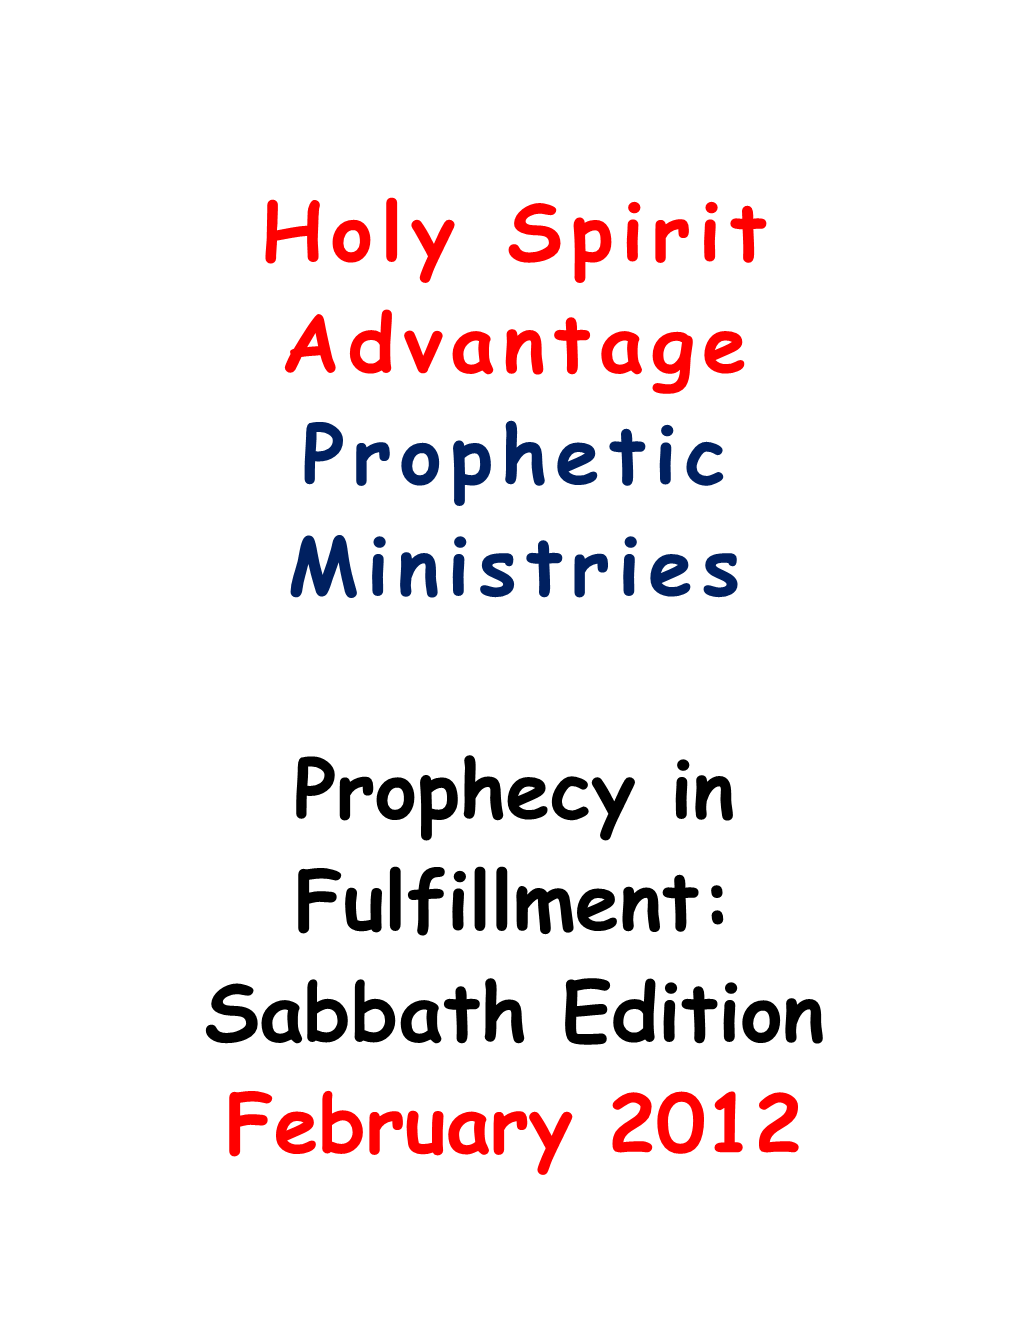 Prophecy in Fulfillment